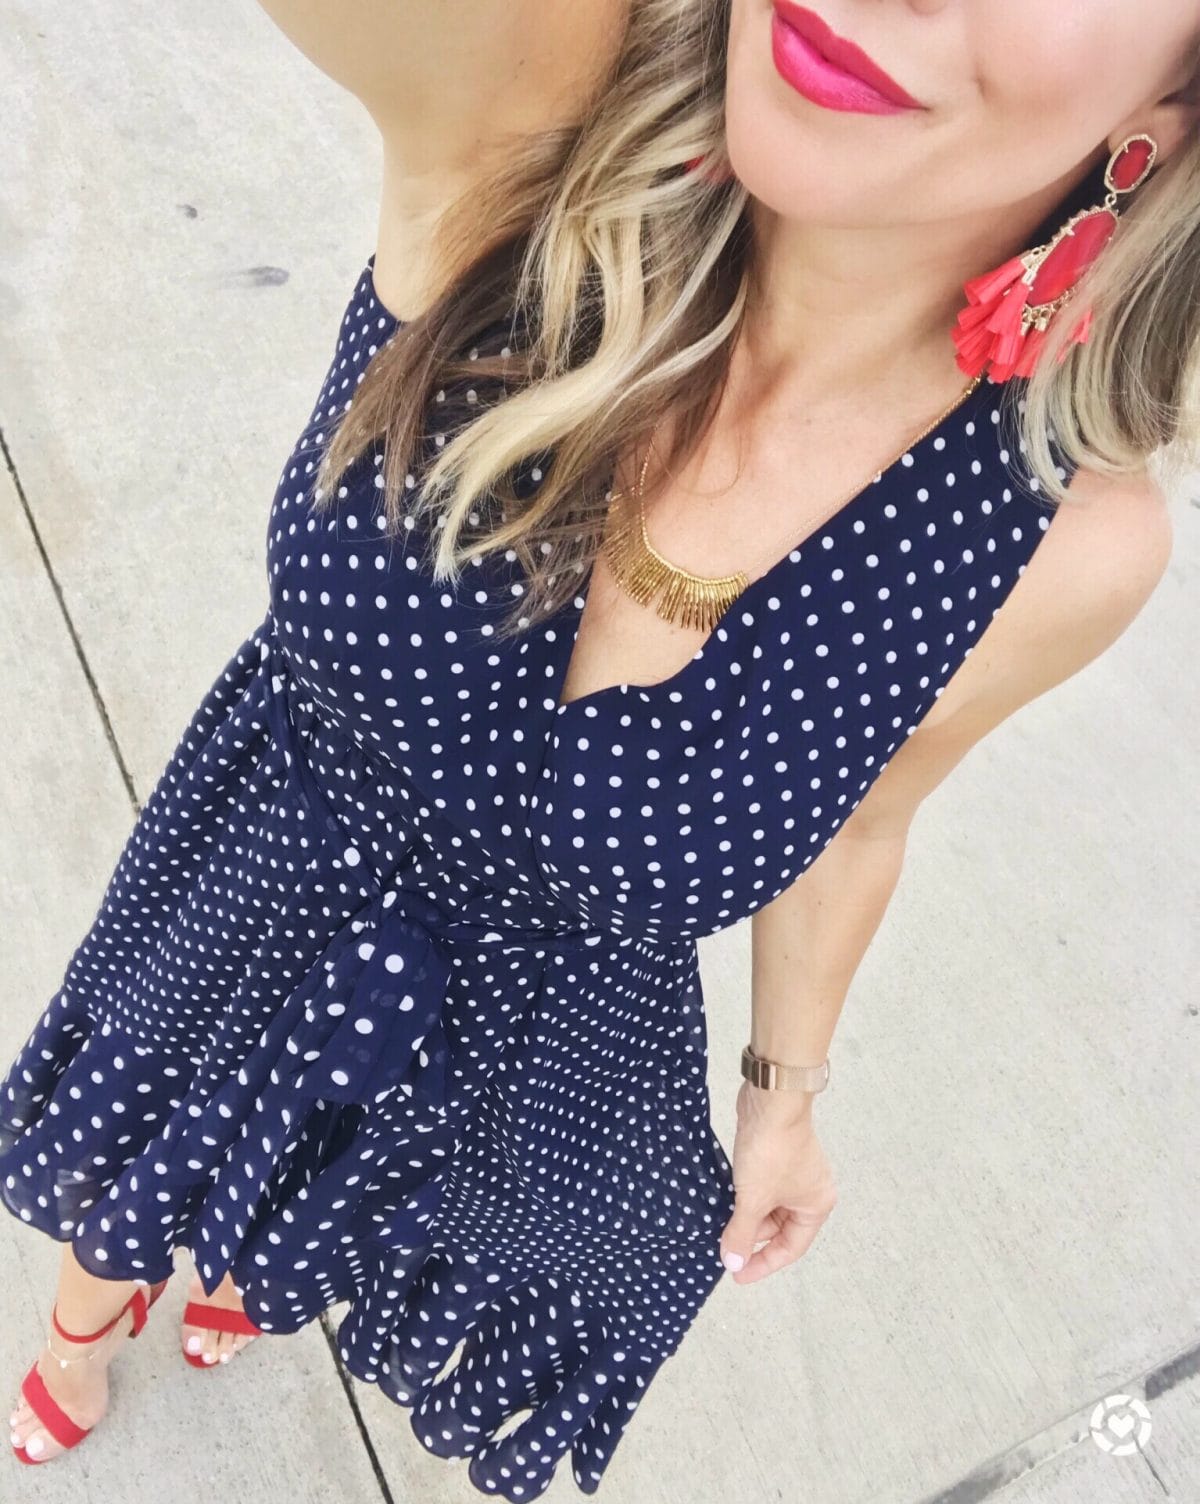 Spring and Summer outfit ideas - navy polka dot dress with red accessories